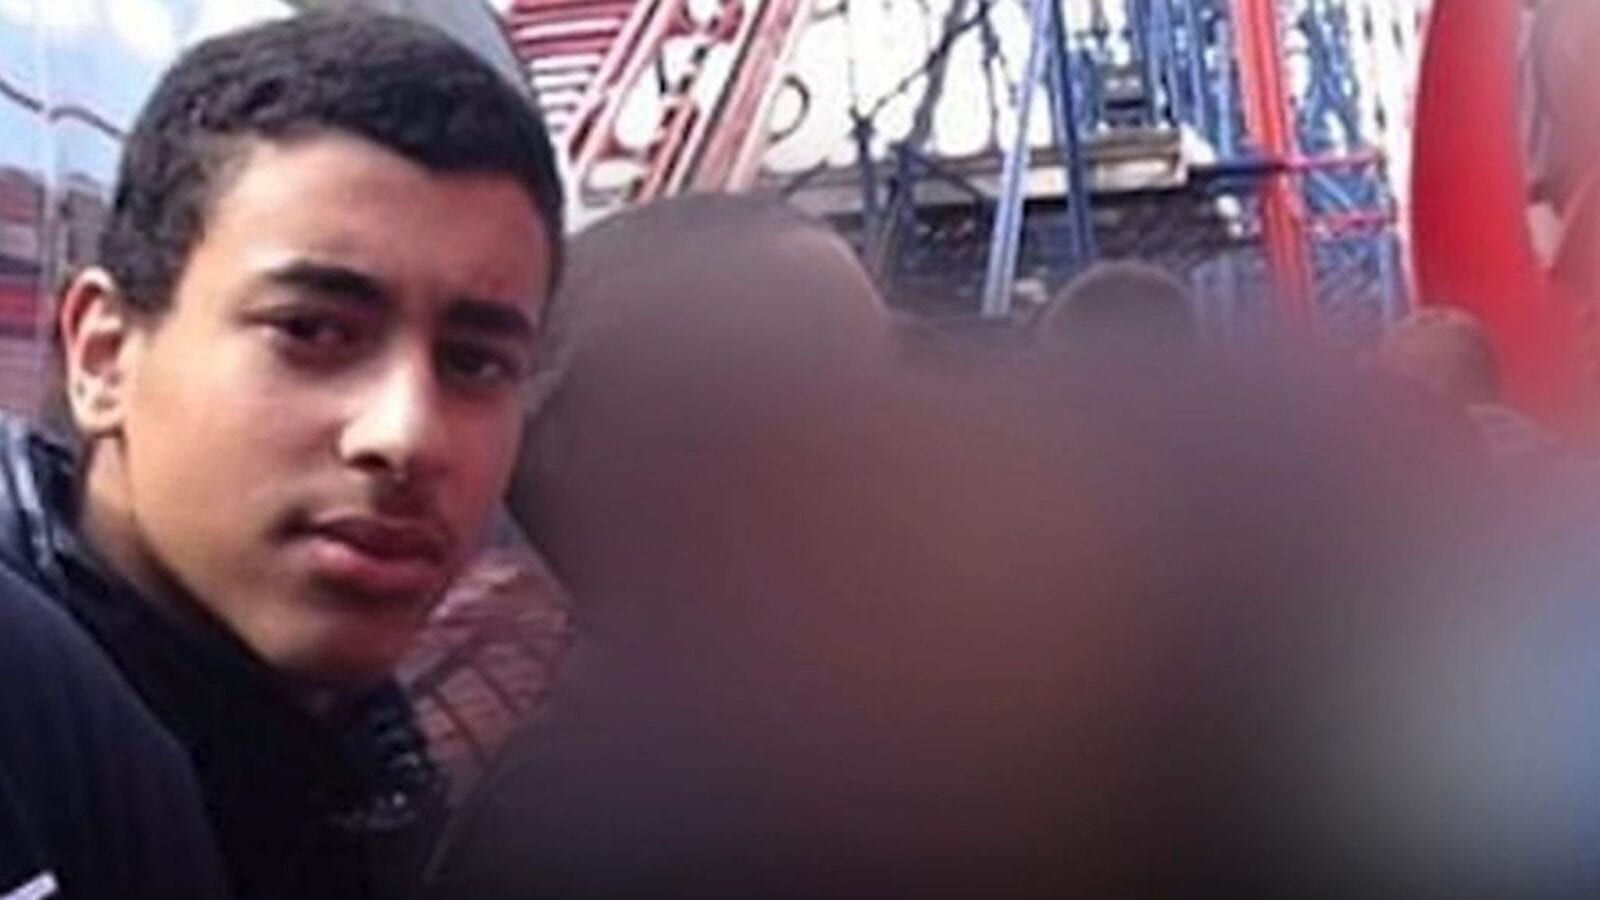 Hashem Abedi has finally admitted his involvement in the Manchester Arena bombing, The Manc